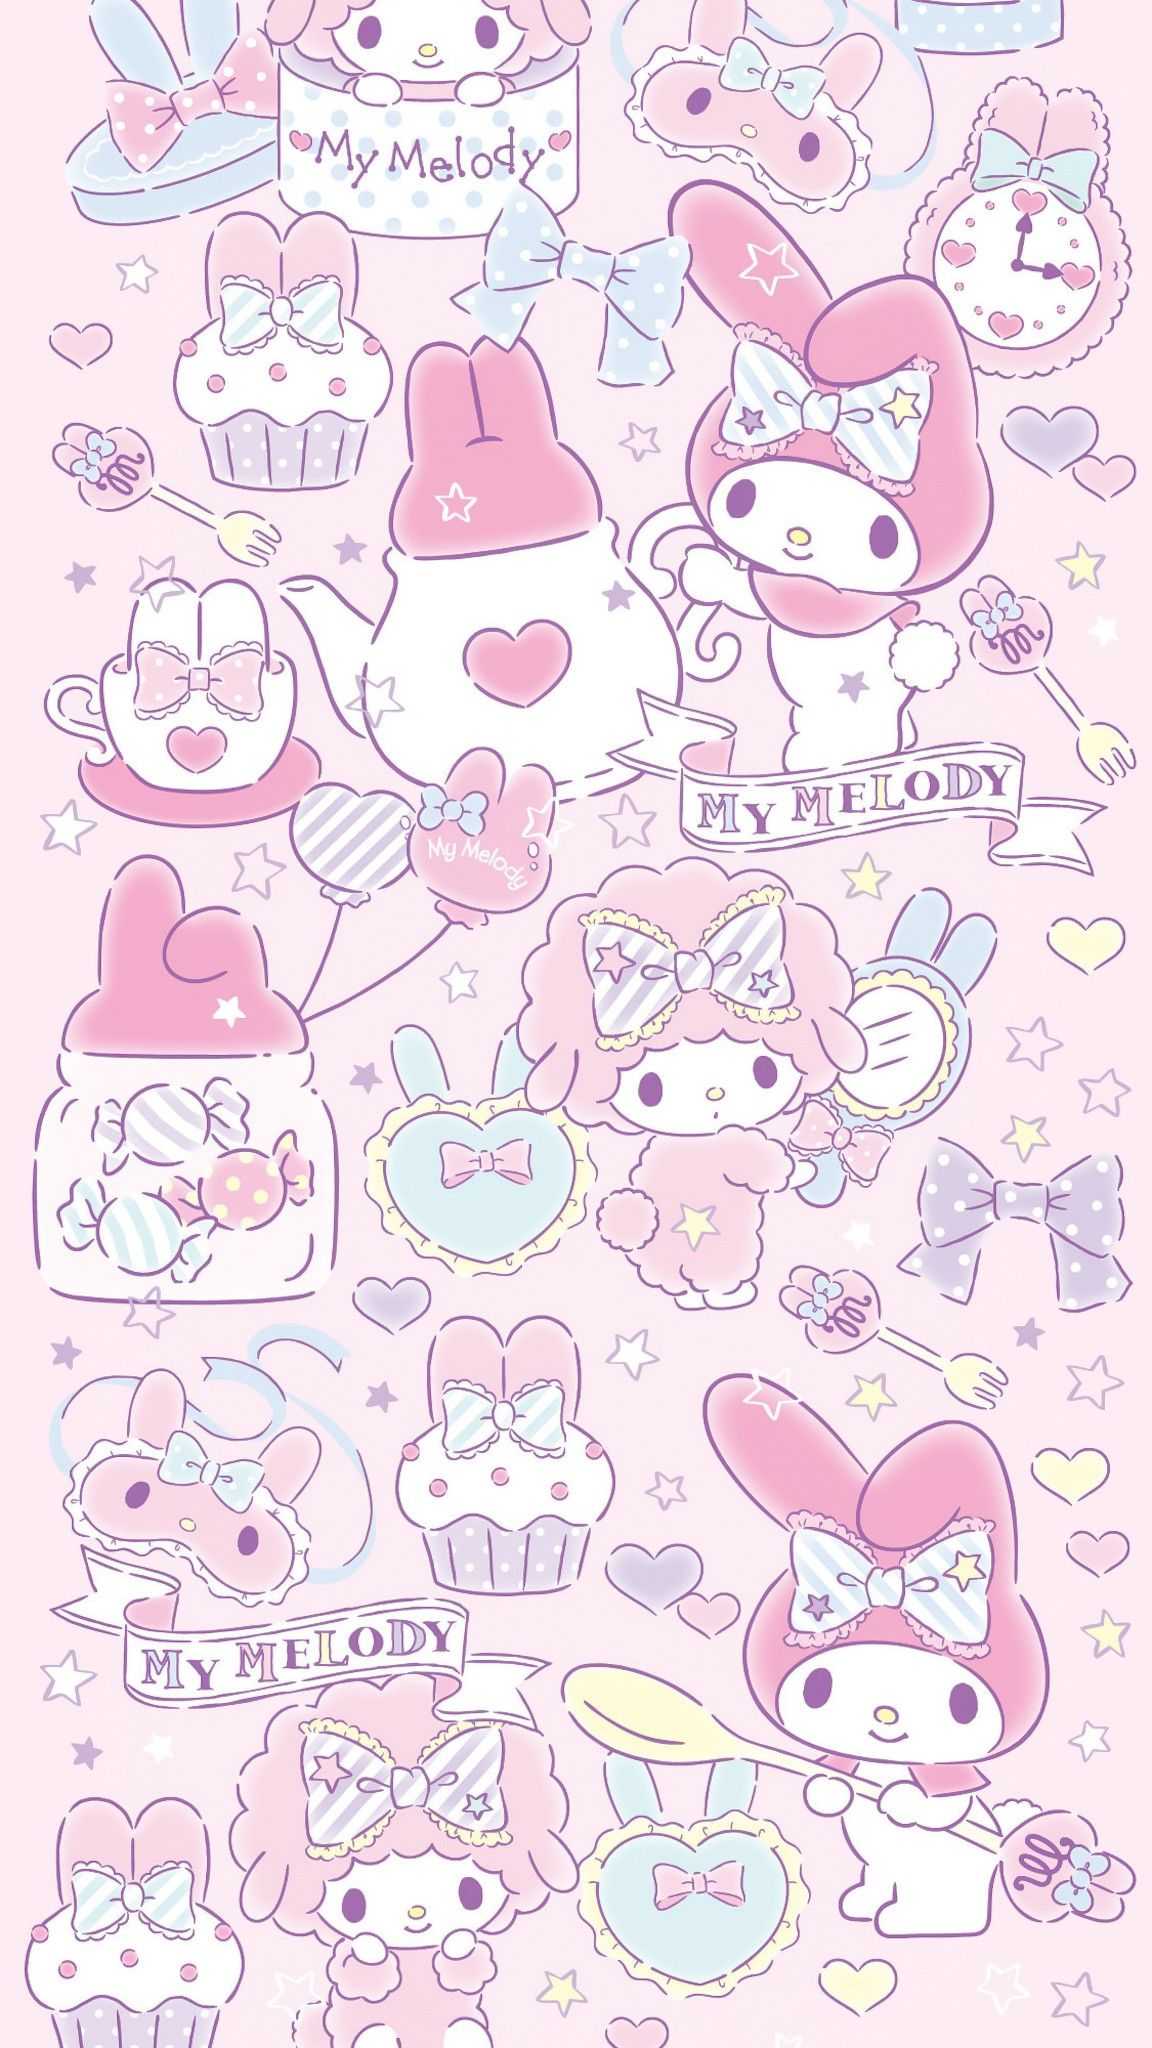 My Melody wallpaper for mobile devices - My Melody